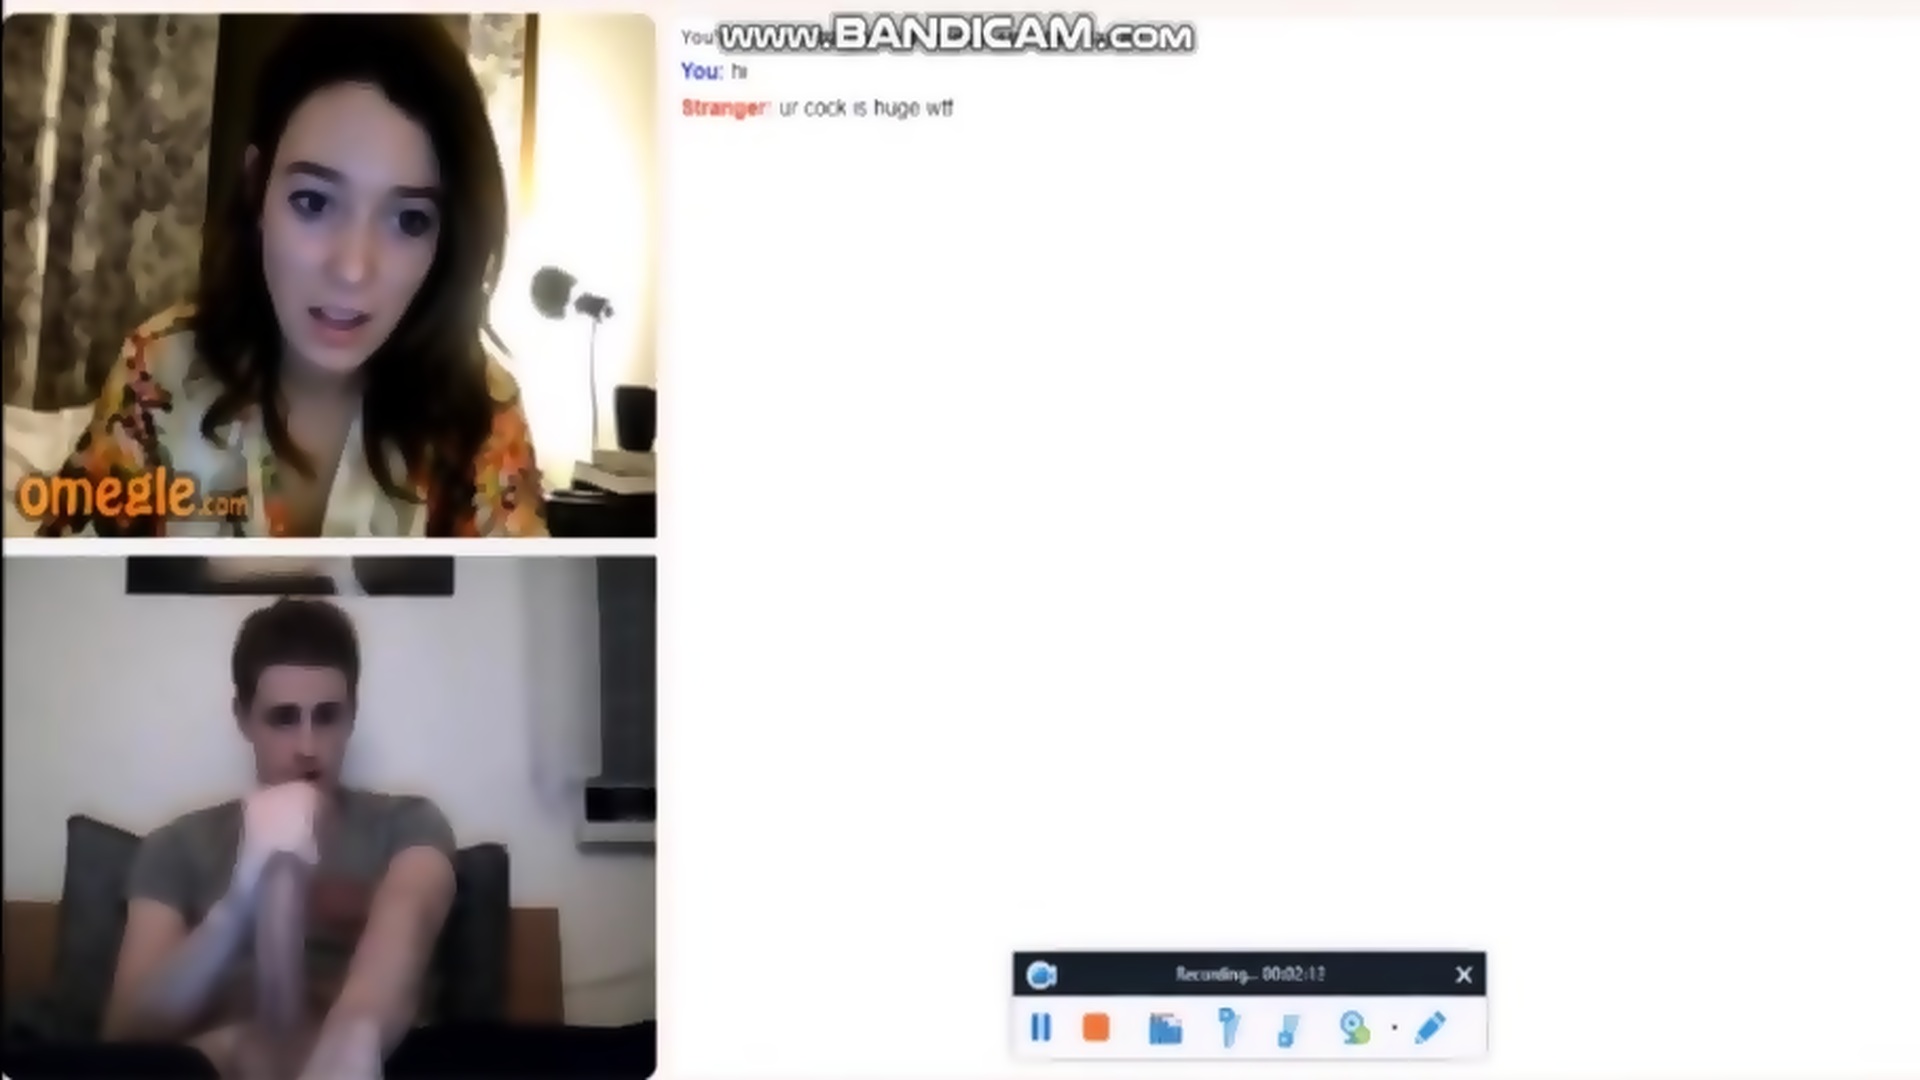 Snow C. reccomend girls crazy over seeing dick omegle